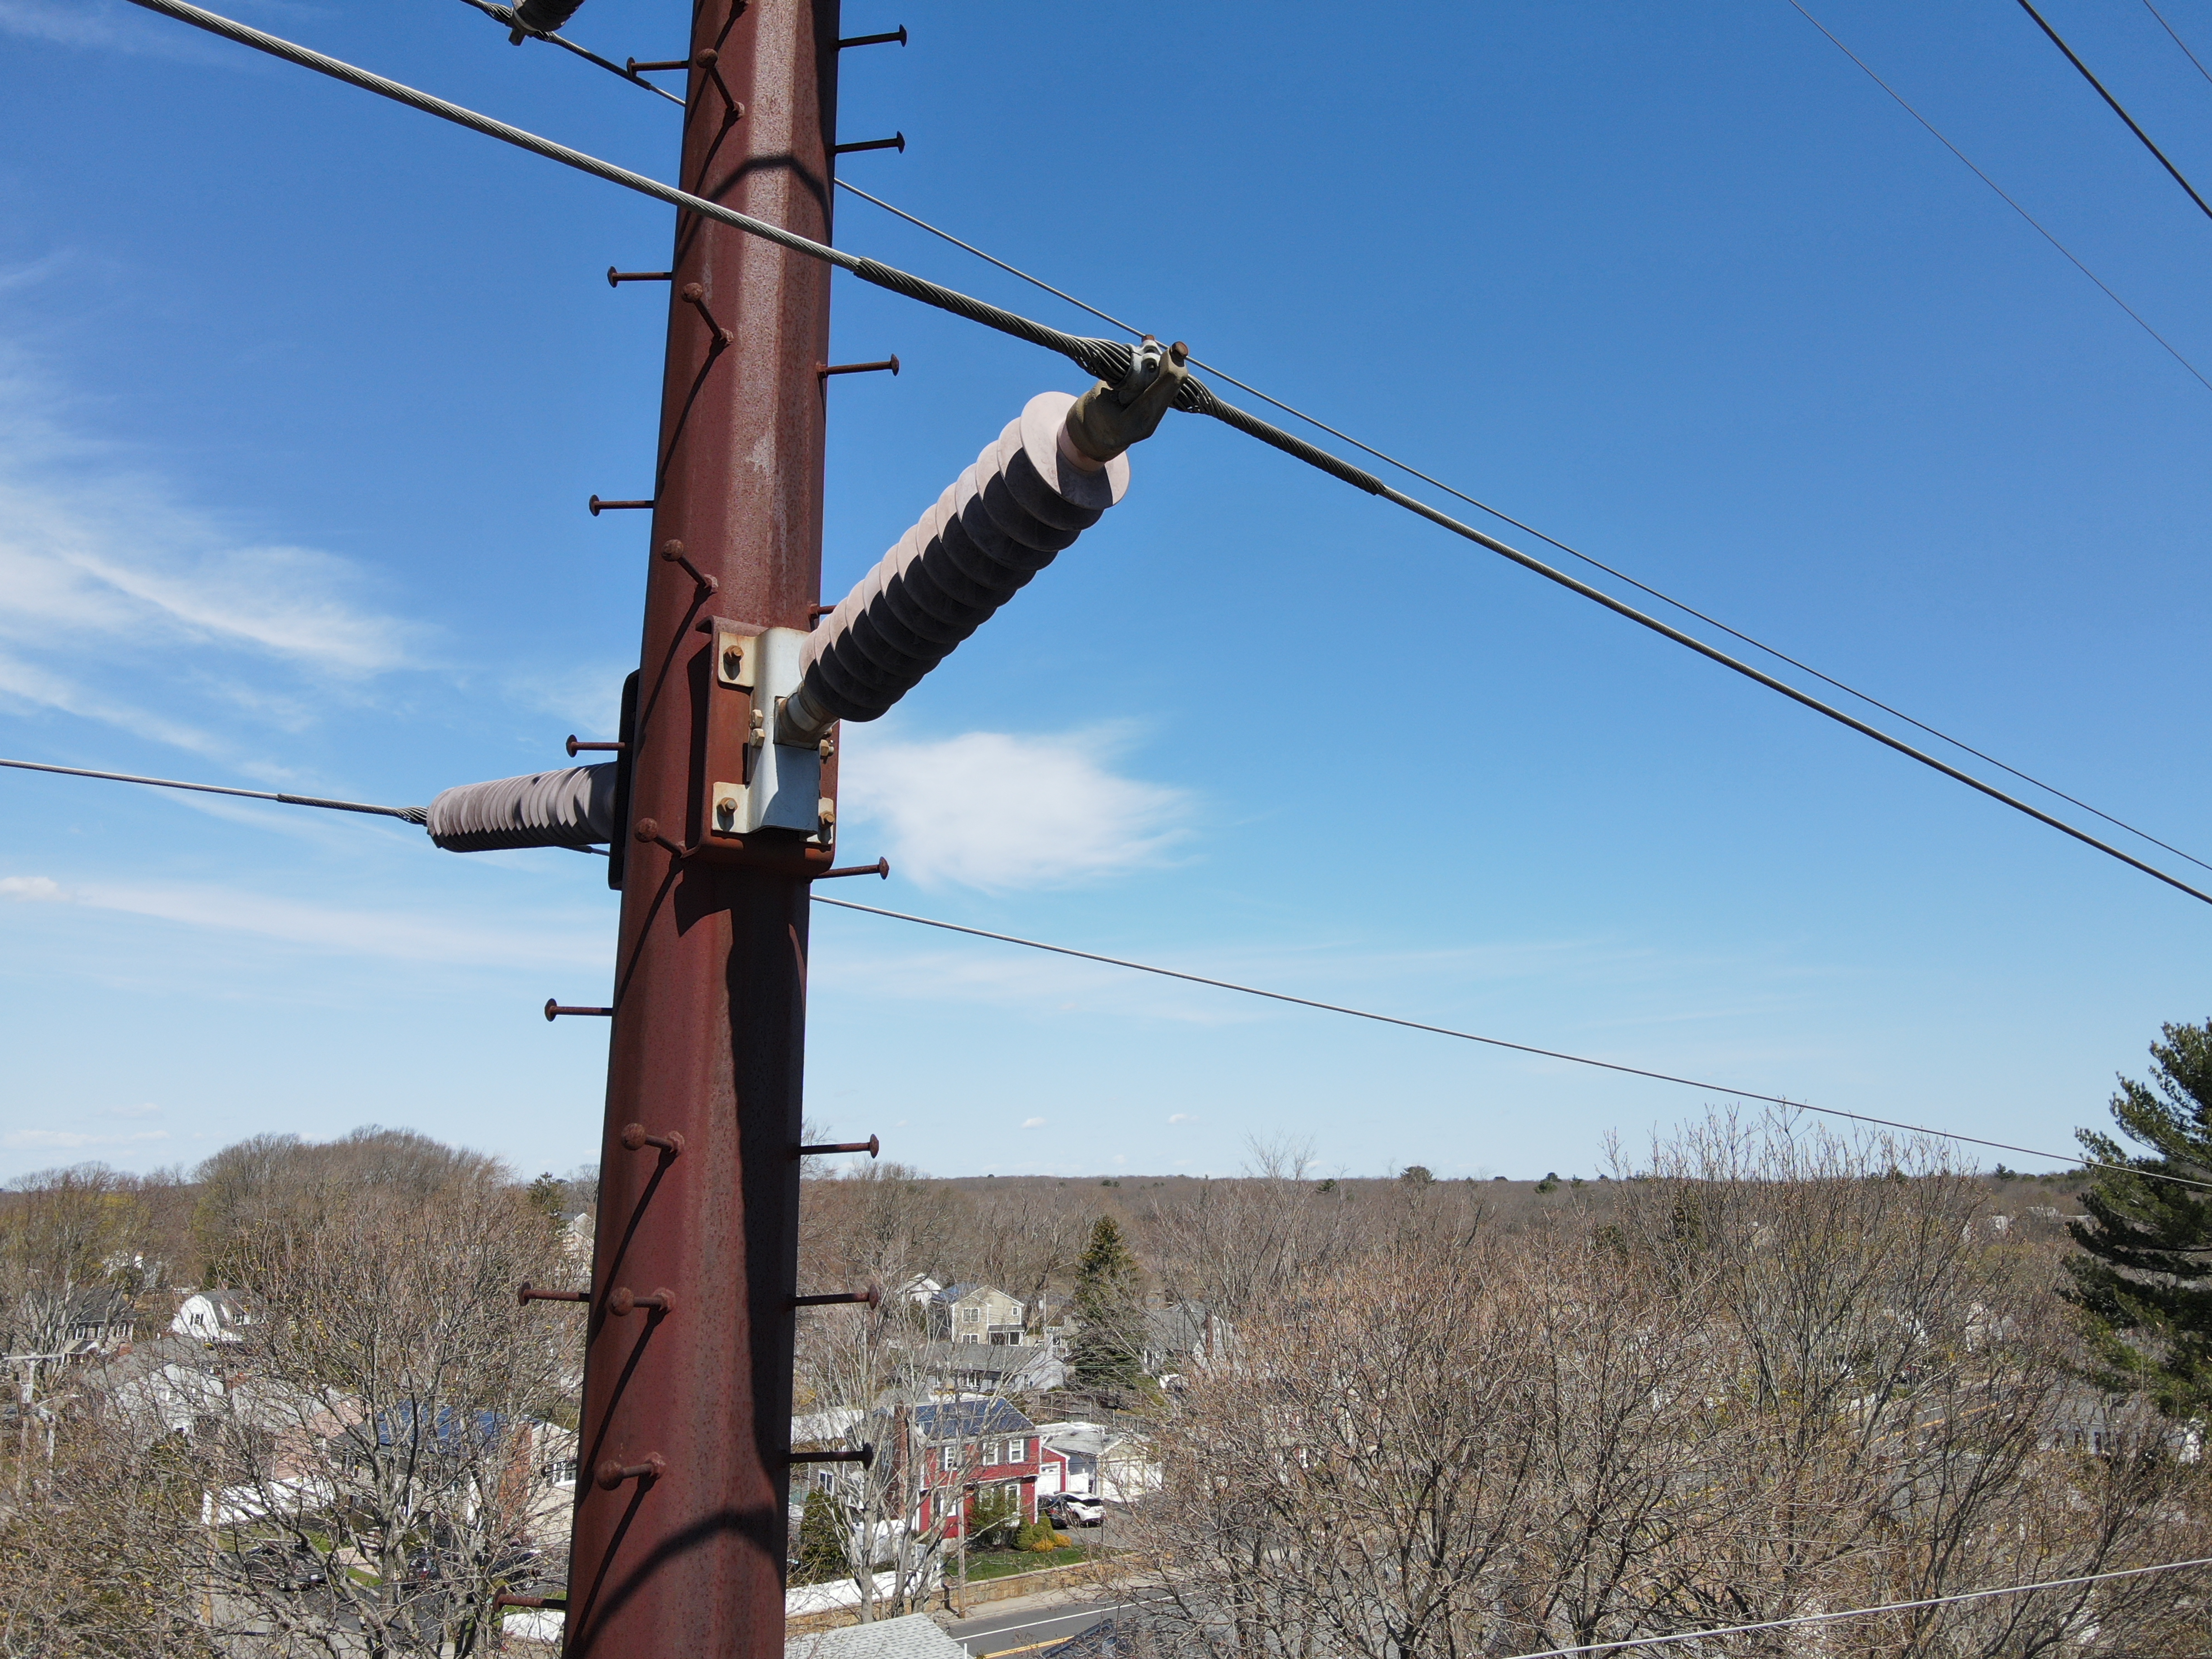 Hingham Electrical Infrastructure Reliability Project (HEIRP)